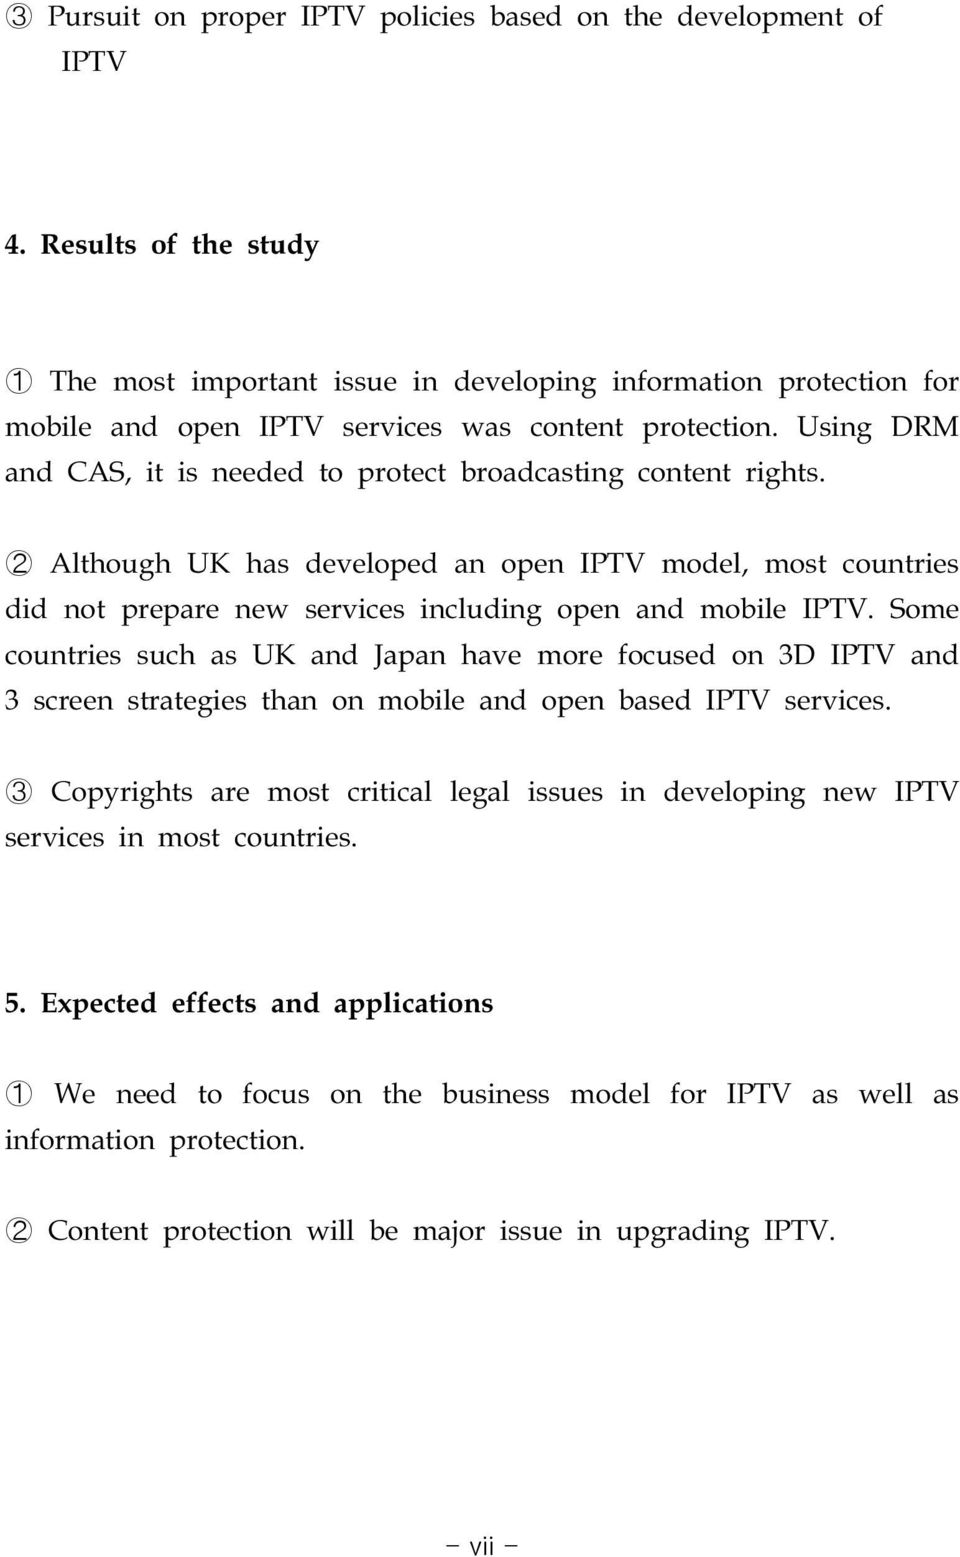 Using DRM and CAS, it is needed to protect broadcasting content rights. ➁ Although UK has developed an open IPTV model, most countries did not prepare new services including open and mobile IPTV.